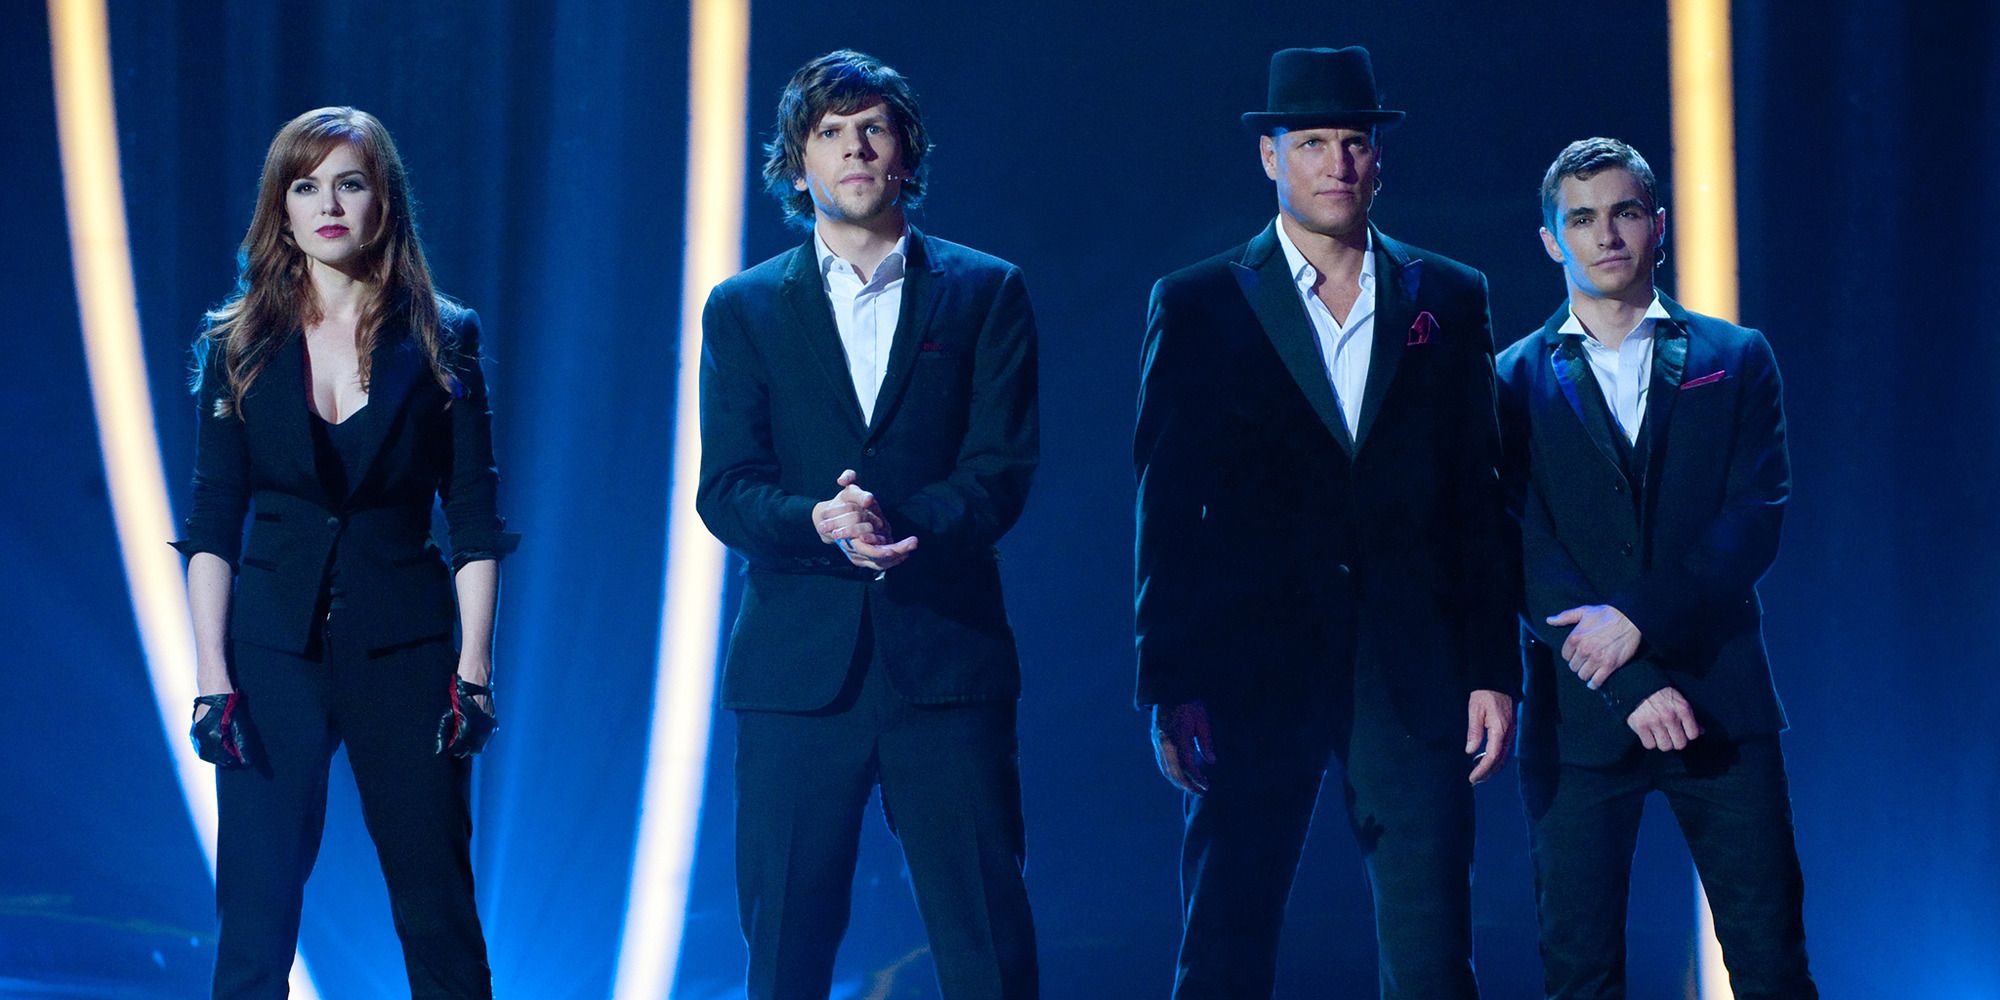 Isla Fisher, Jesse Eisenberg, Woody Harrelson, and Dave Franco as magicians on stage in Now You See Me